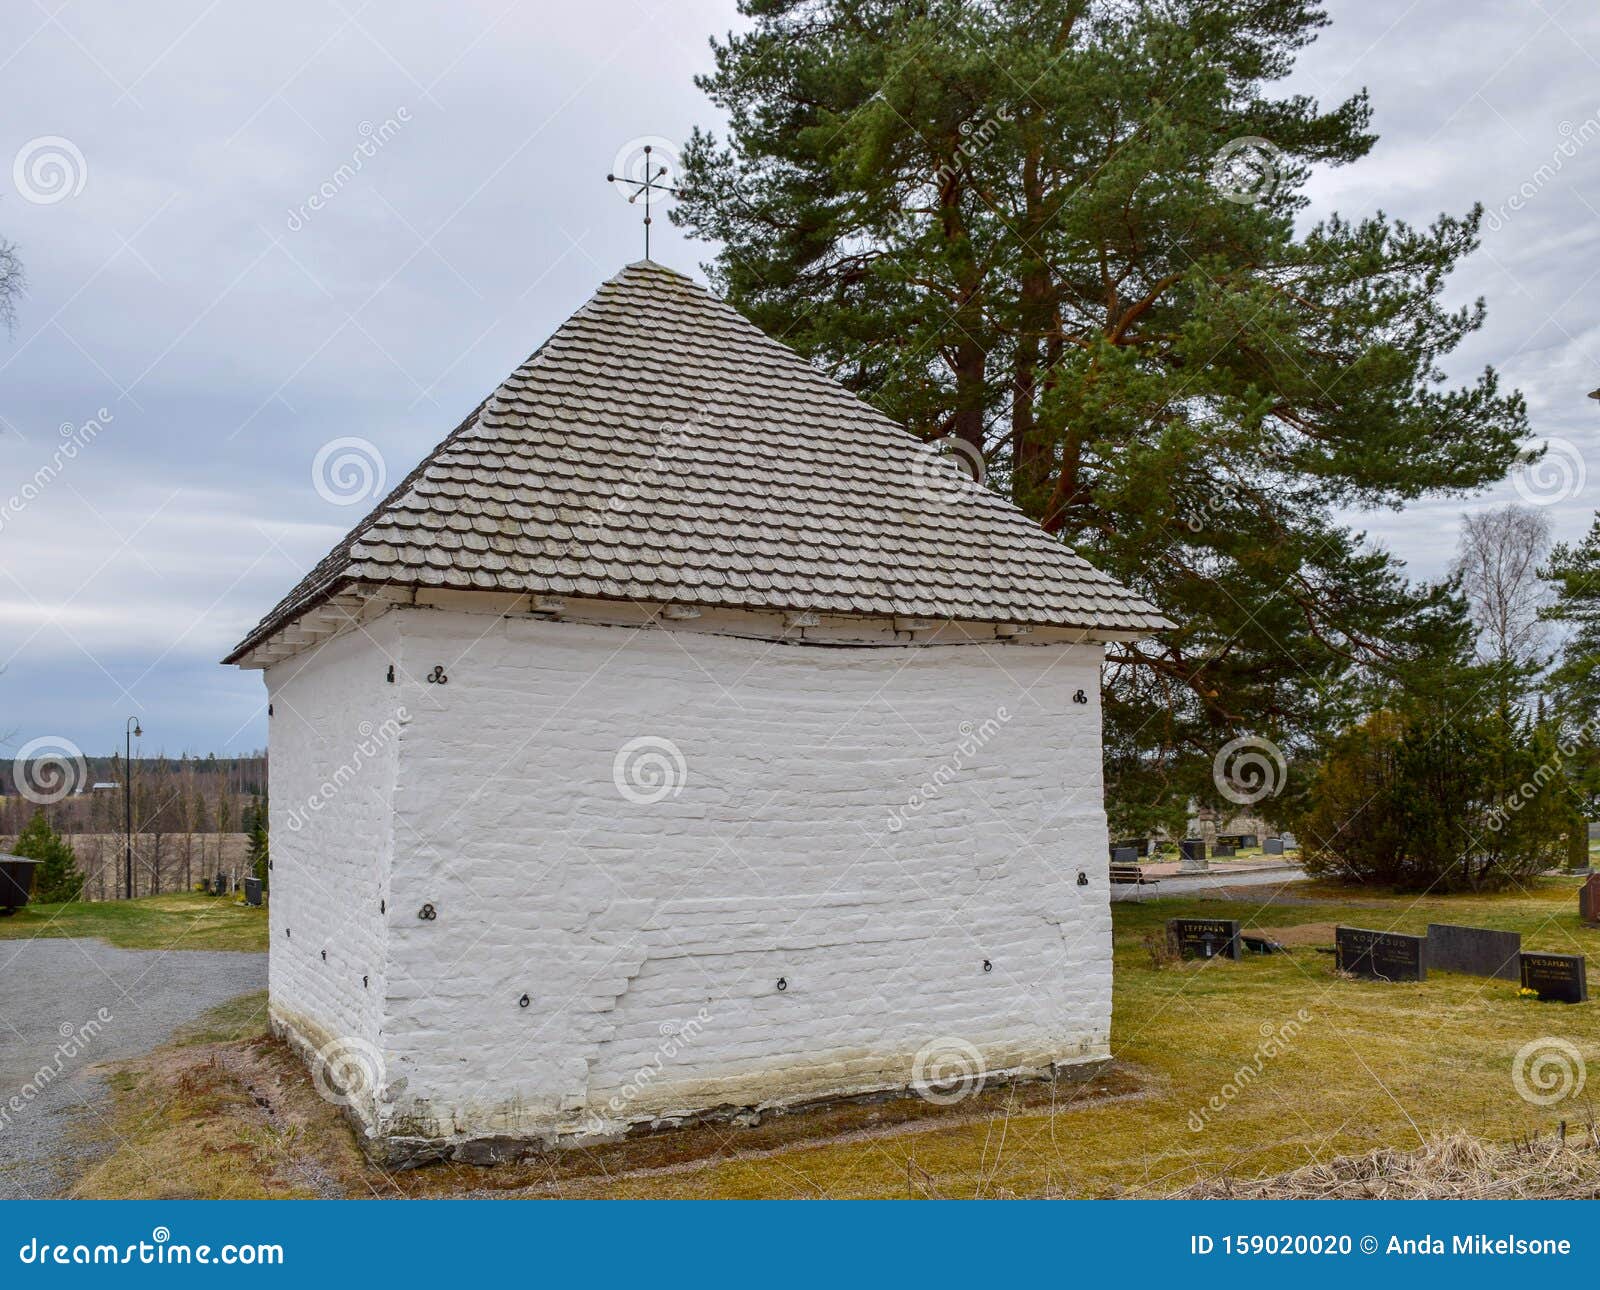 picture with very old stone house, interesting wooden tile roof